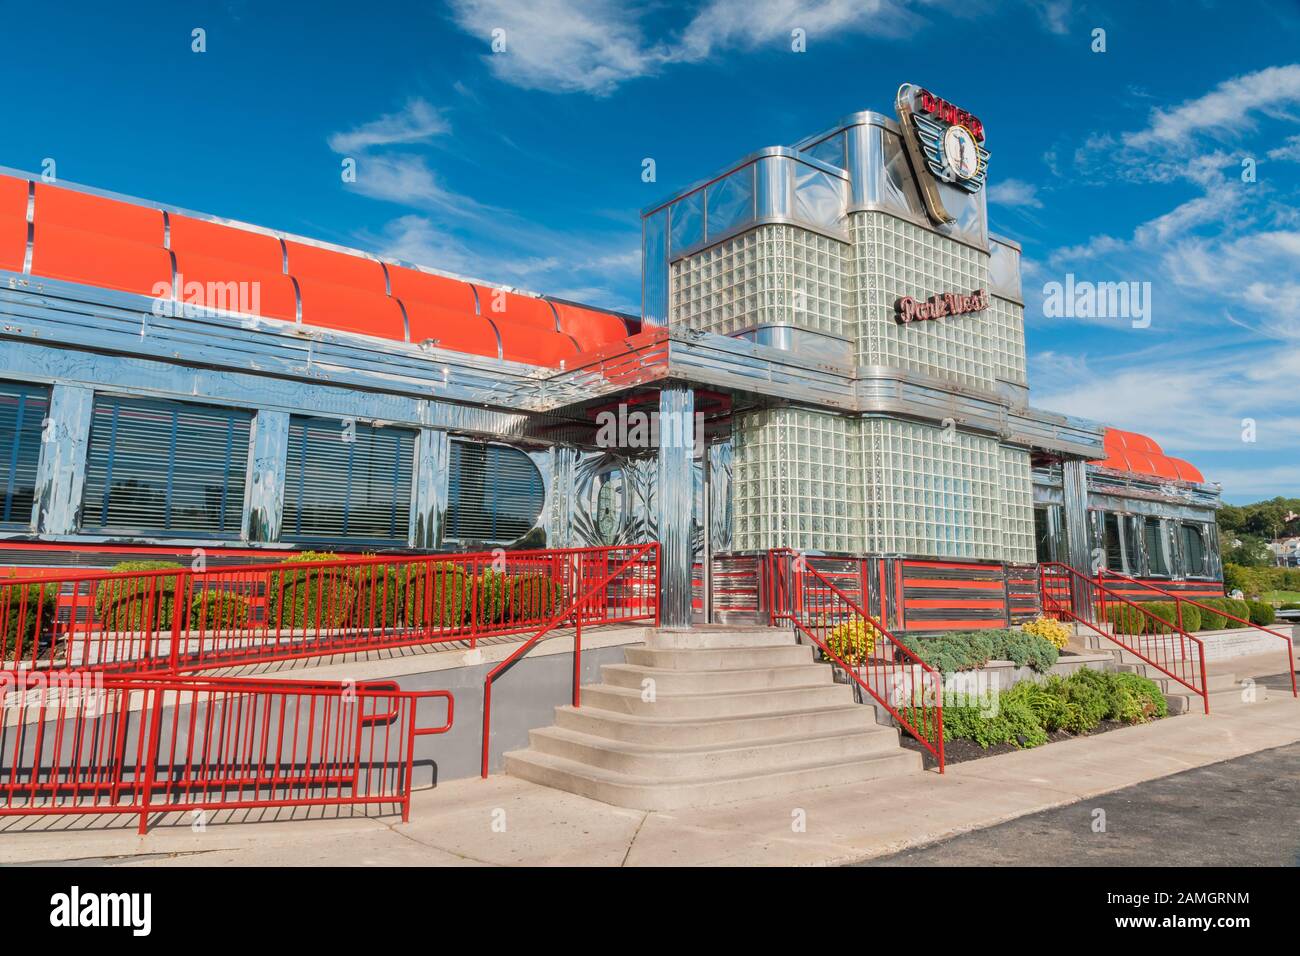 Vintage American Diner Style High Resolution Stock Photography and Images -  Alamy